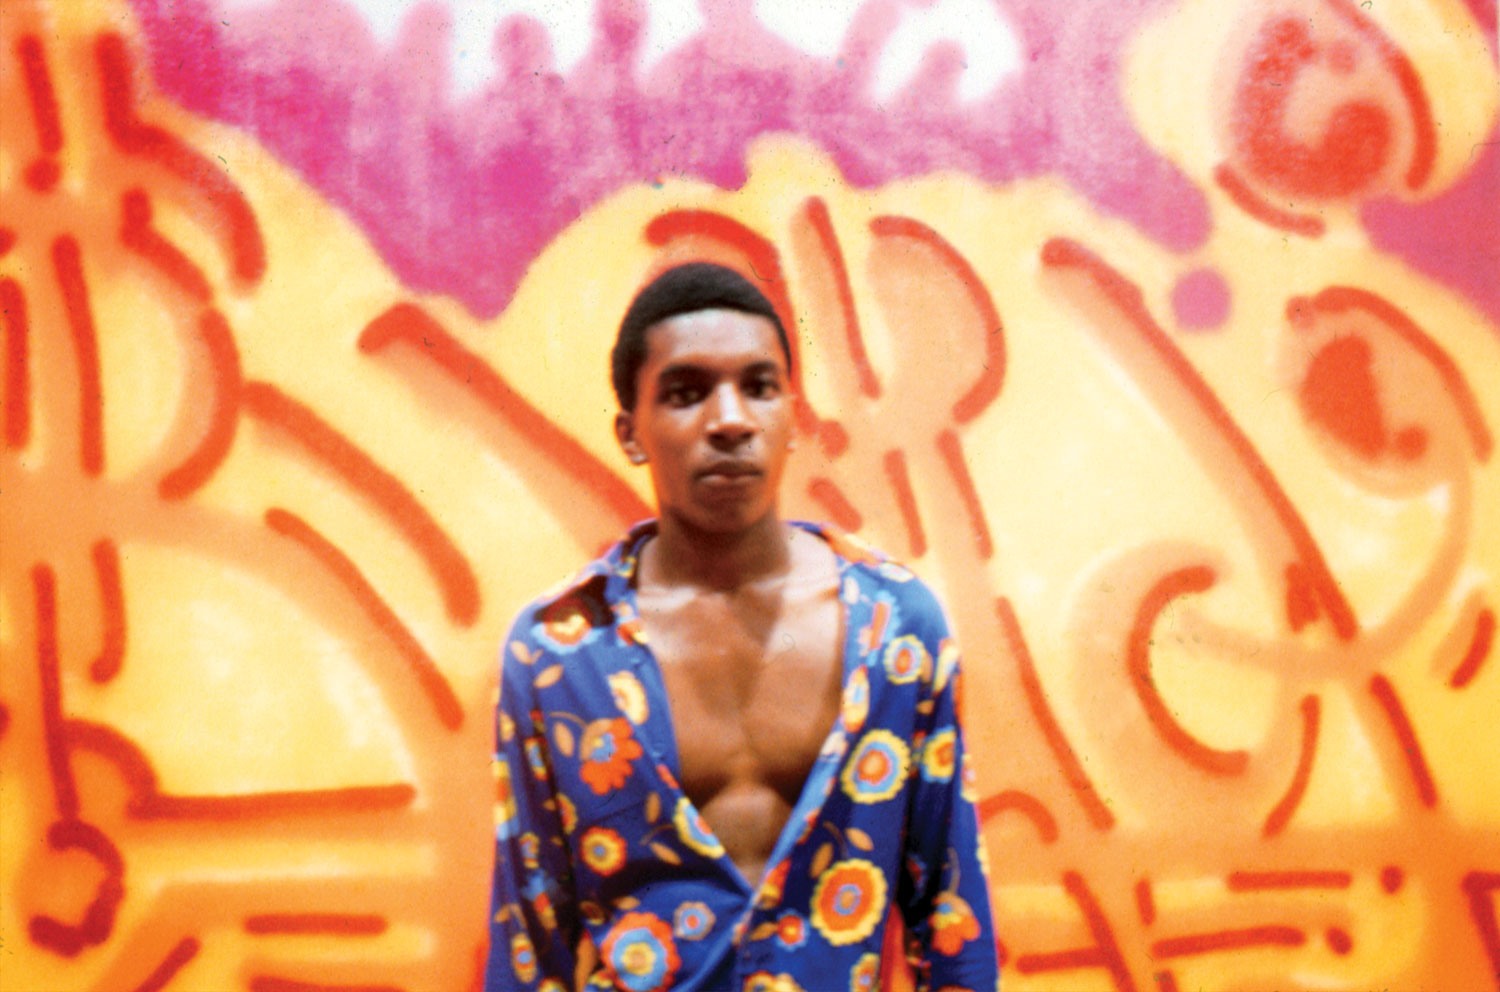 BAMA poses in front of his painting "Orange Juice" at the Razor Gallery. 1973.